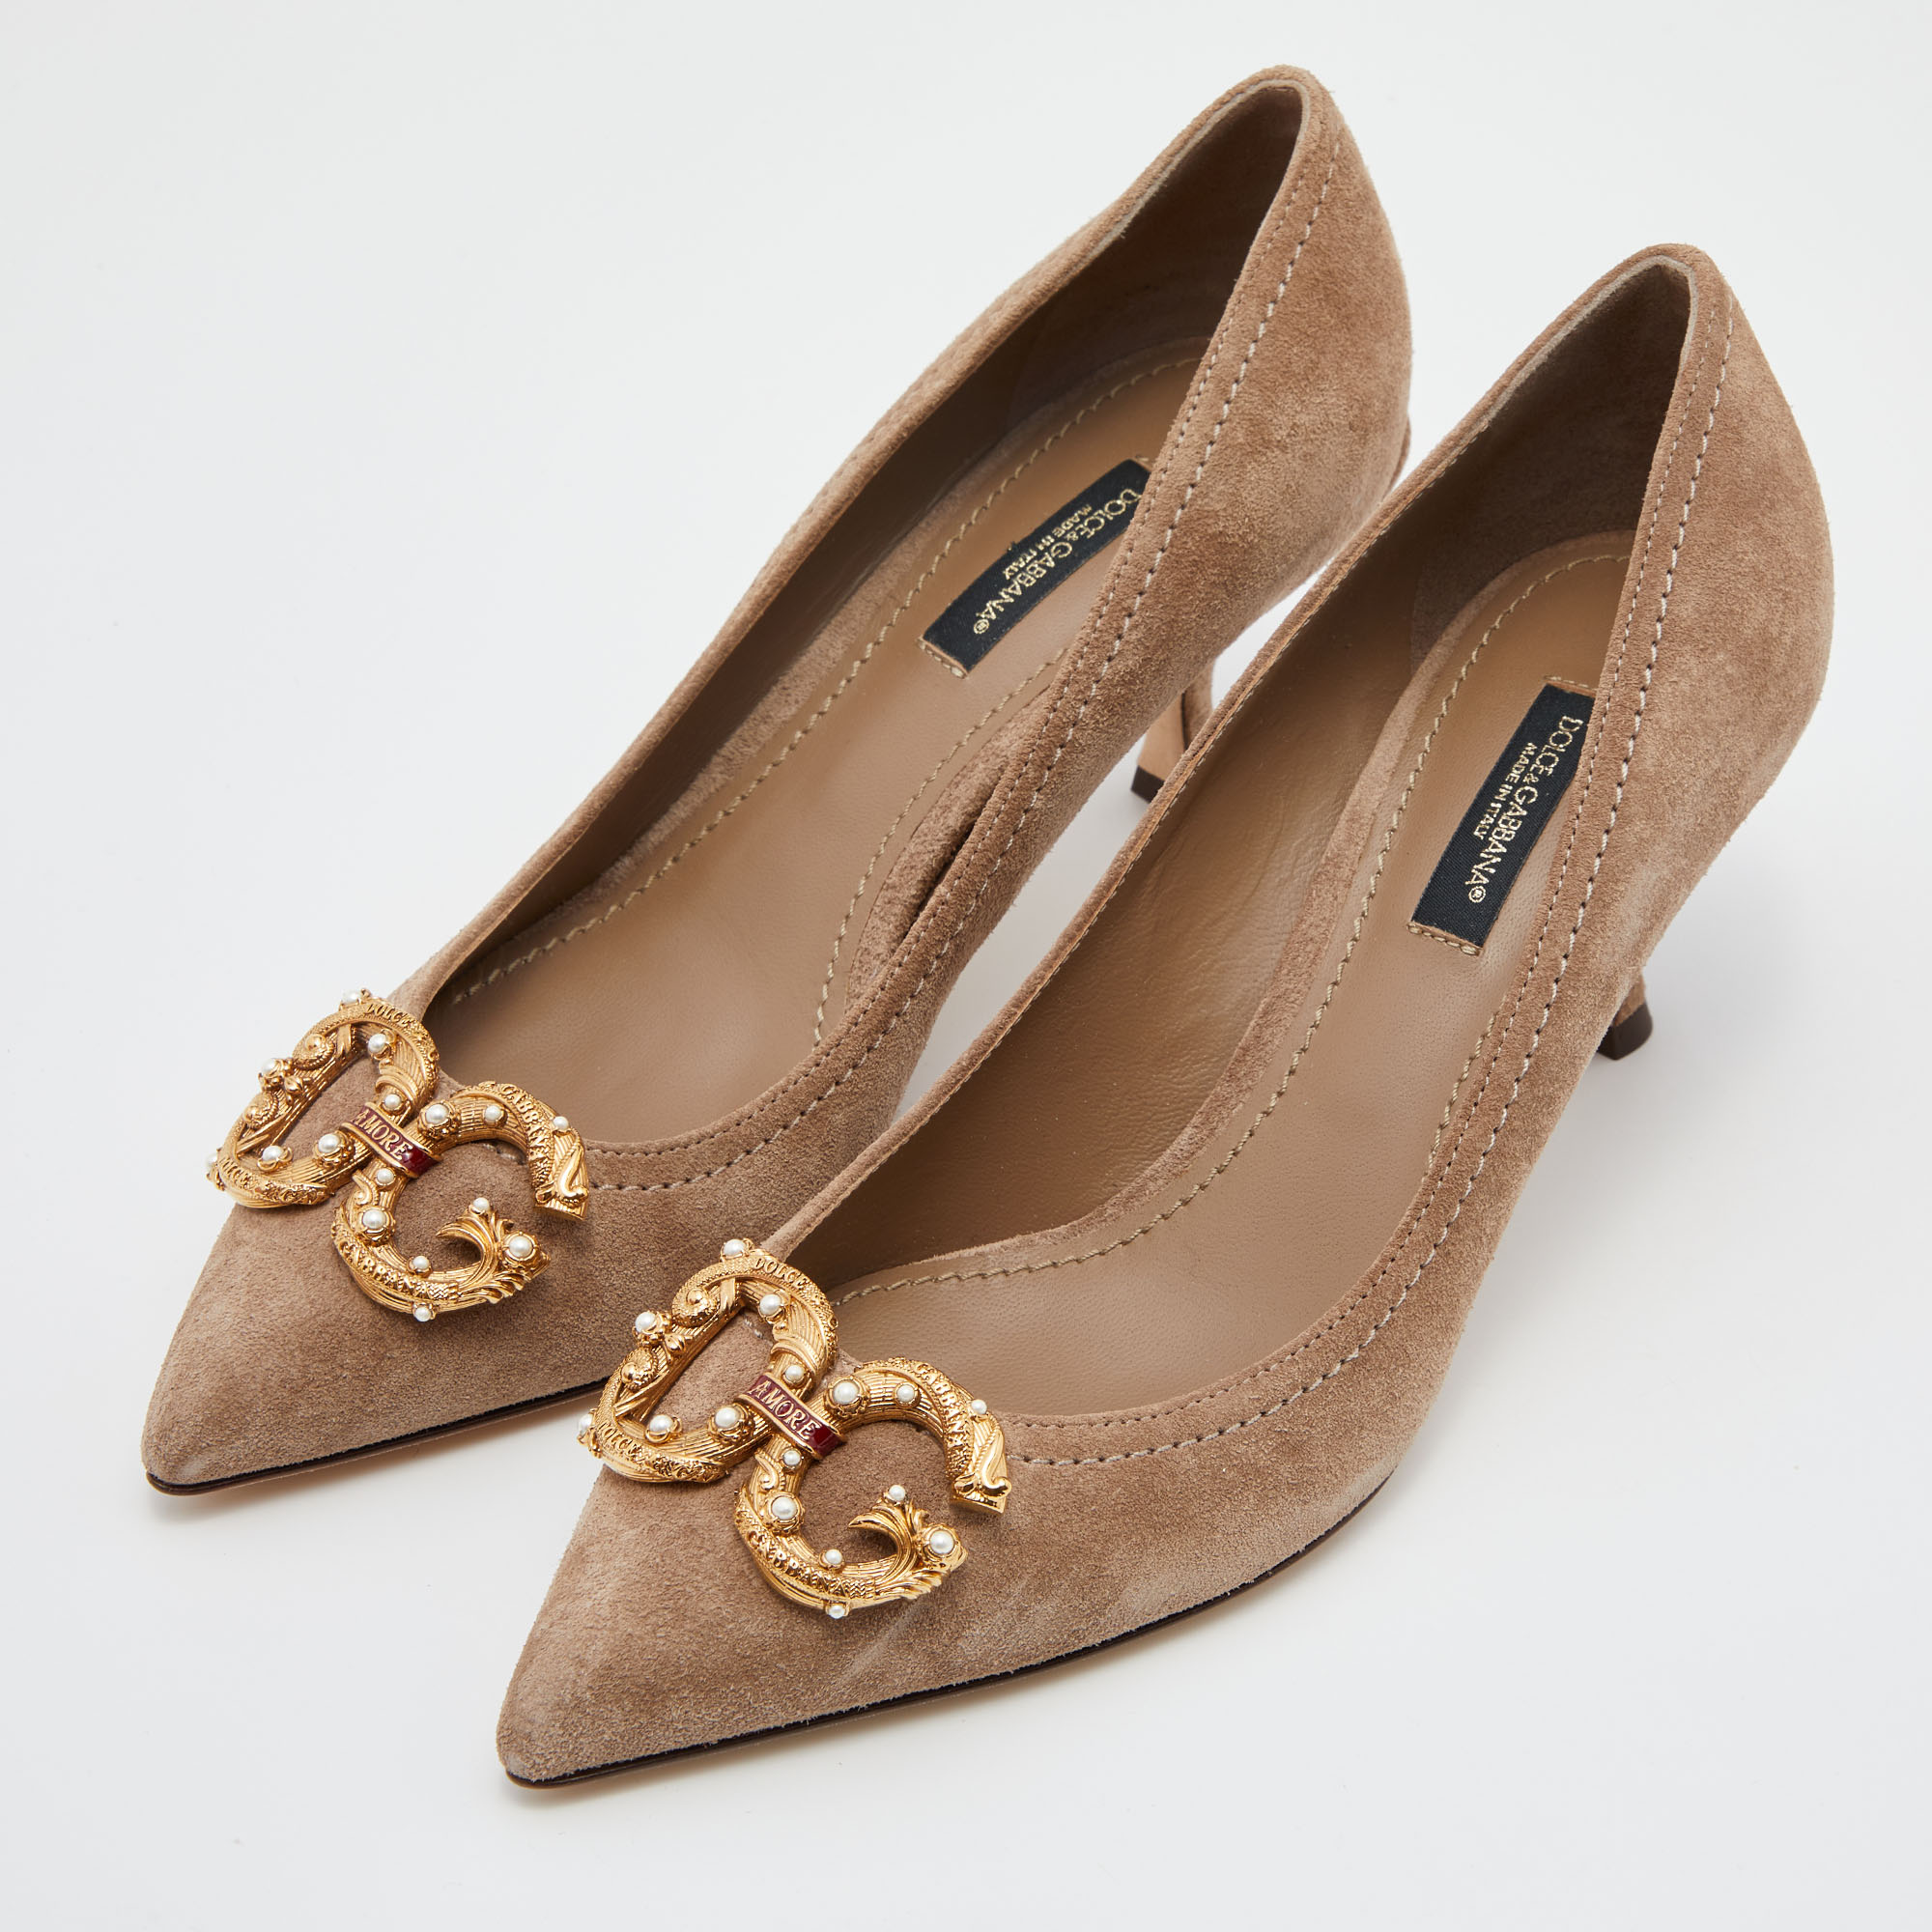 

Dolce & Gabbana Light Brown Suede DG Amore Pointed Toe Pumps Size